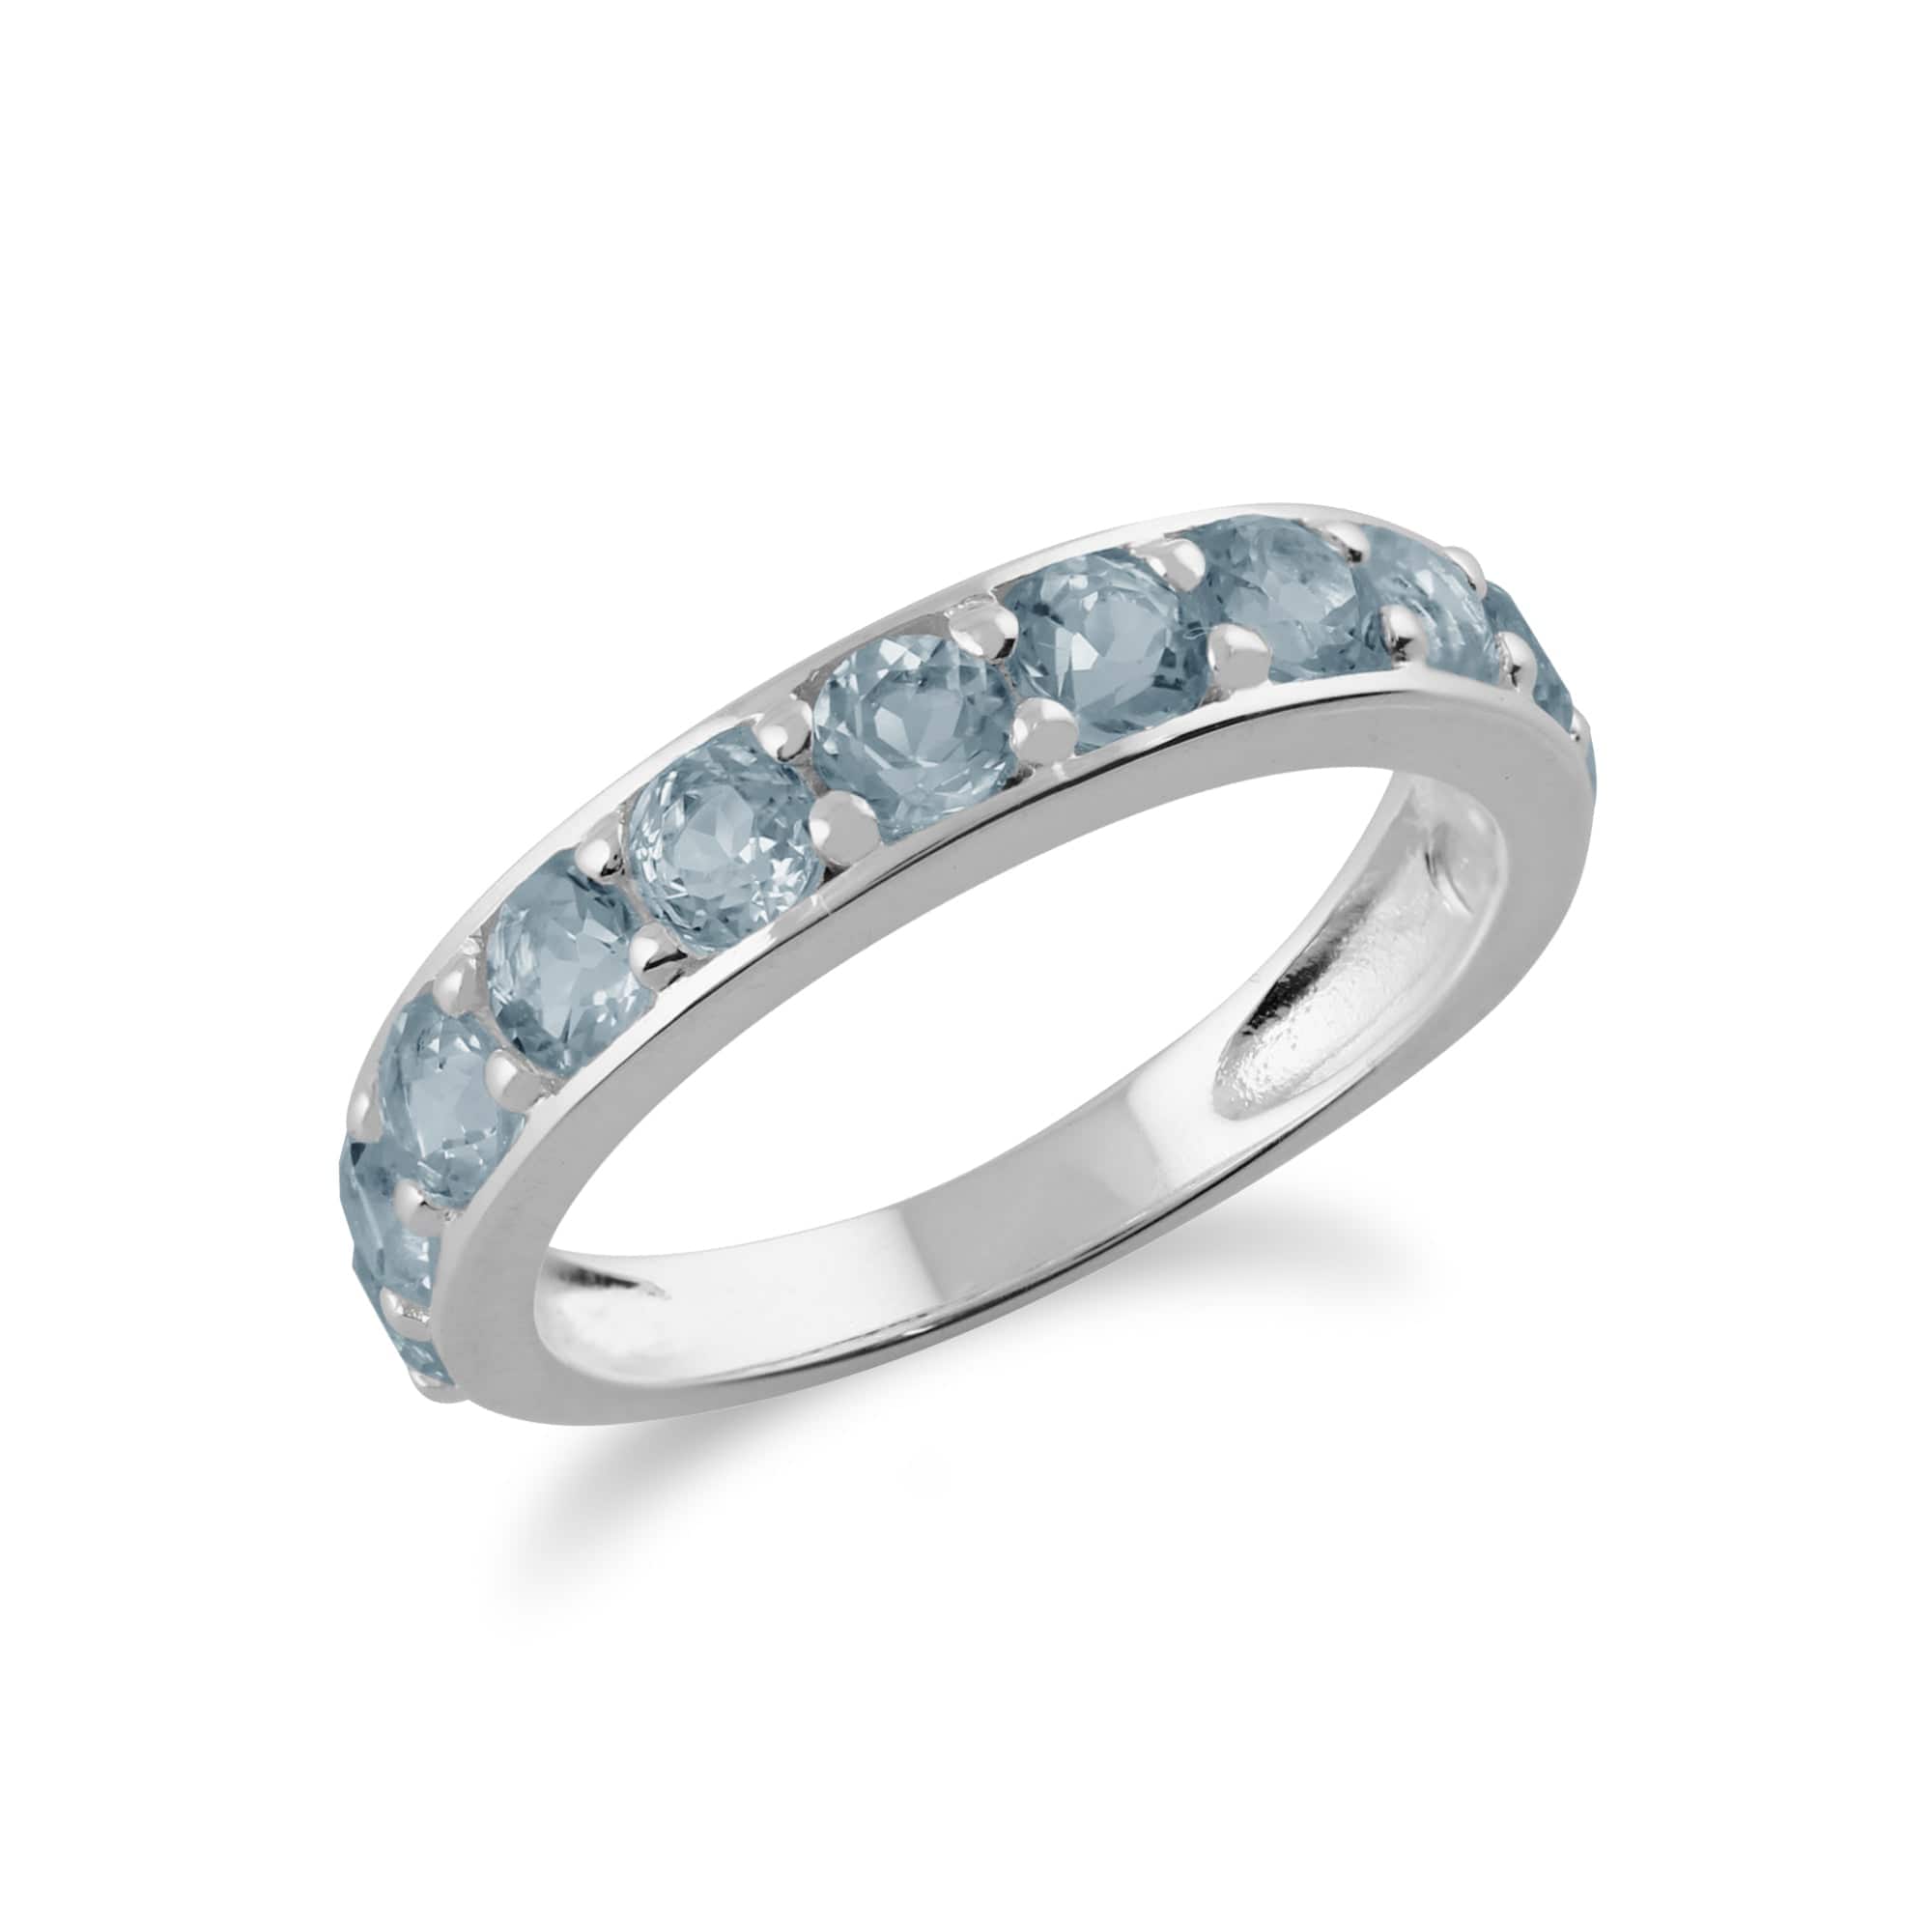 212R010604925 Classic Round Blue Topaz Half Eternity Ring in 925 Sterling Silver 4